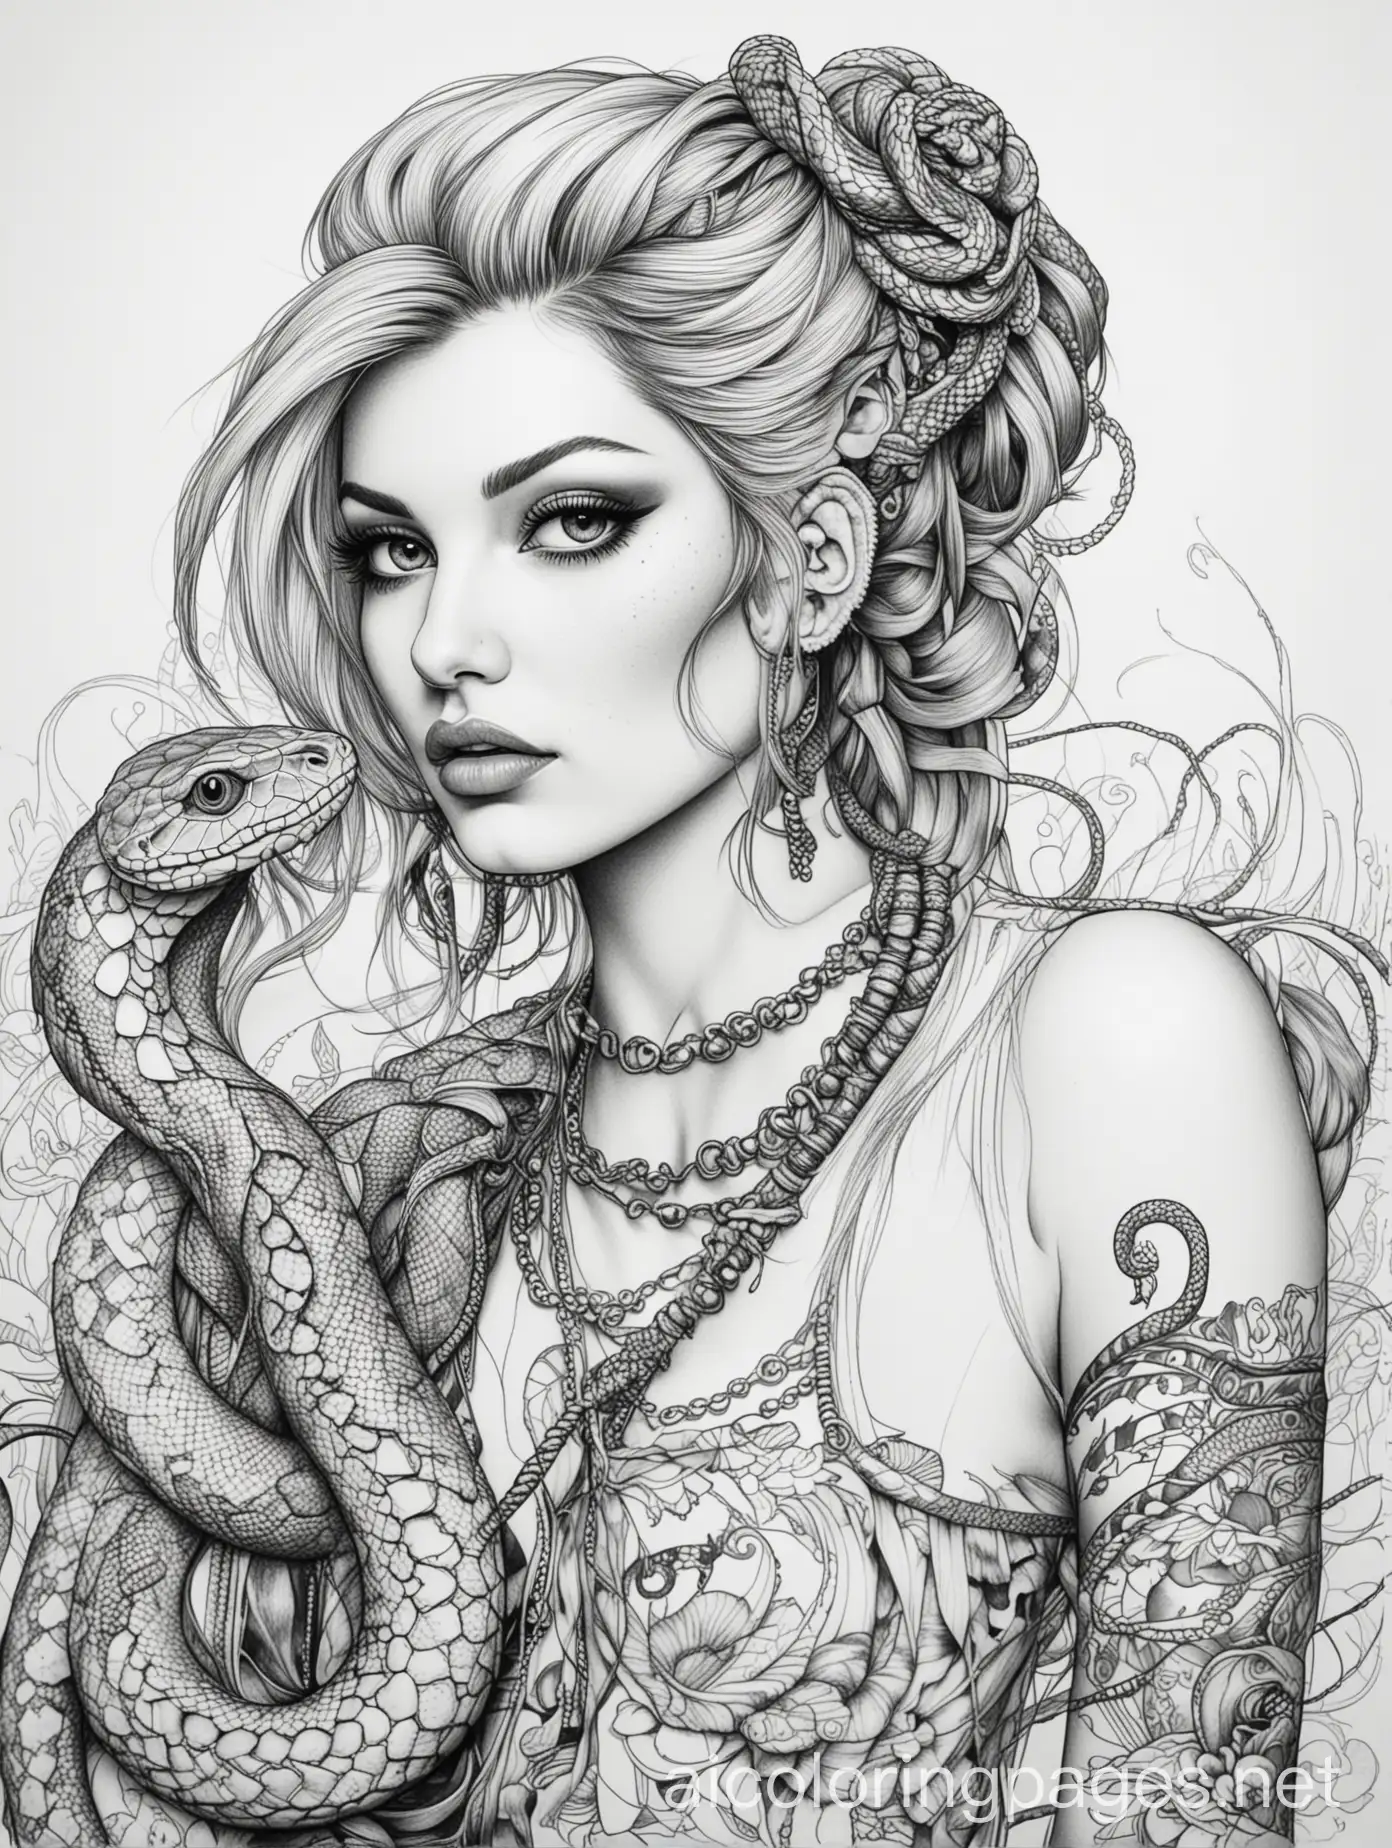 colouring page beautiful punk lady with a snake, Coloring Page, black and white, line art, white background, Simplicity, Ample White Space. The background of the coloring page is plain white to make it easy for young children to color within the lines. The outlines of all the subjects are easy to distinguish, making it simple for kids to color without too much difficulty